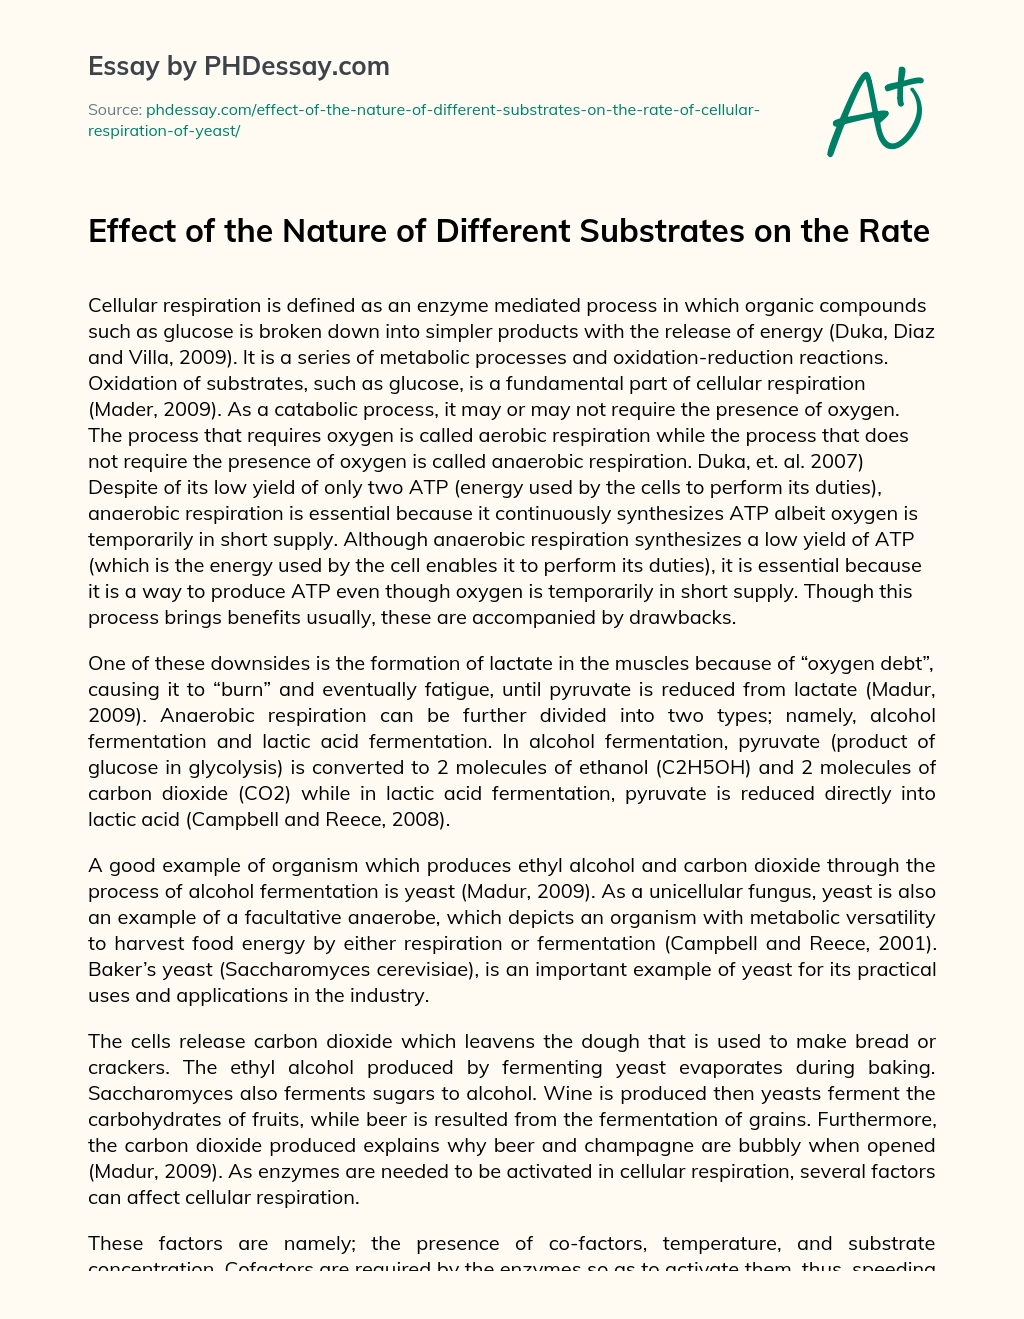 Effect of the Nature of Different Substrates on the Rate essay